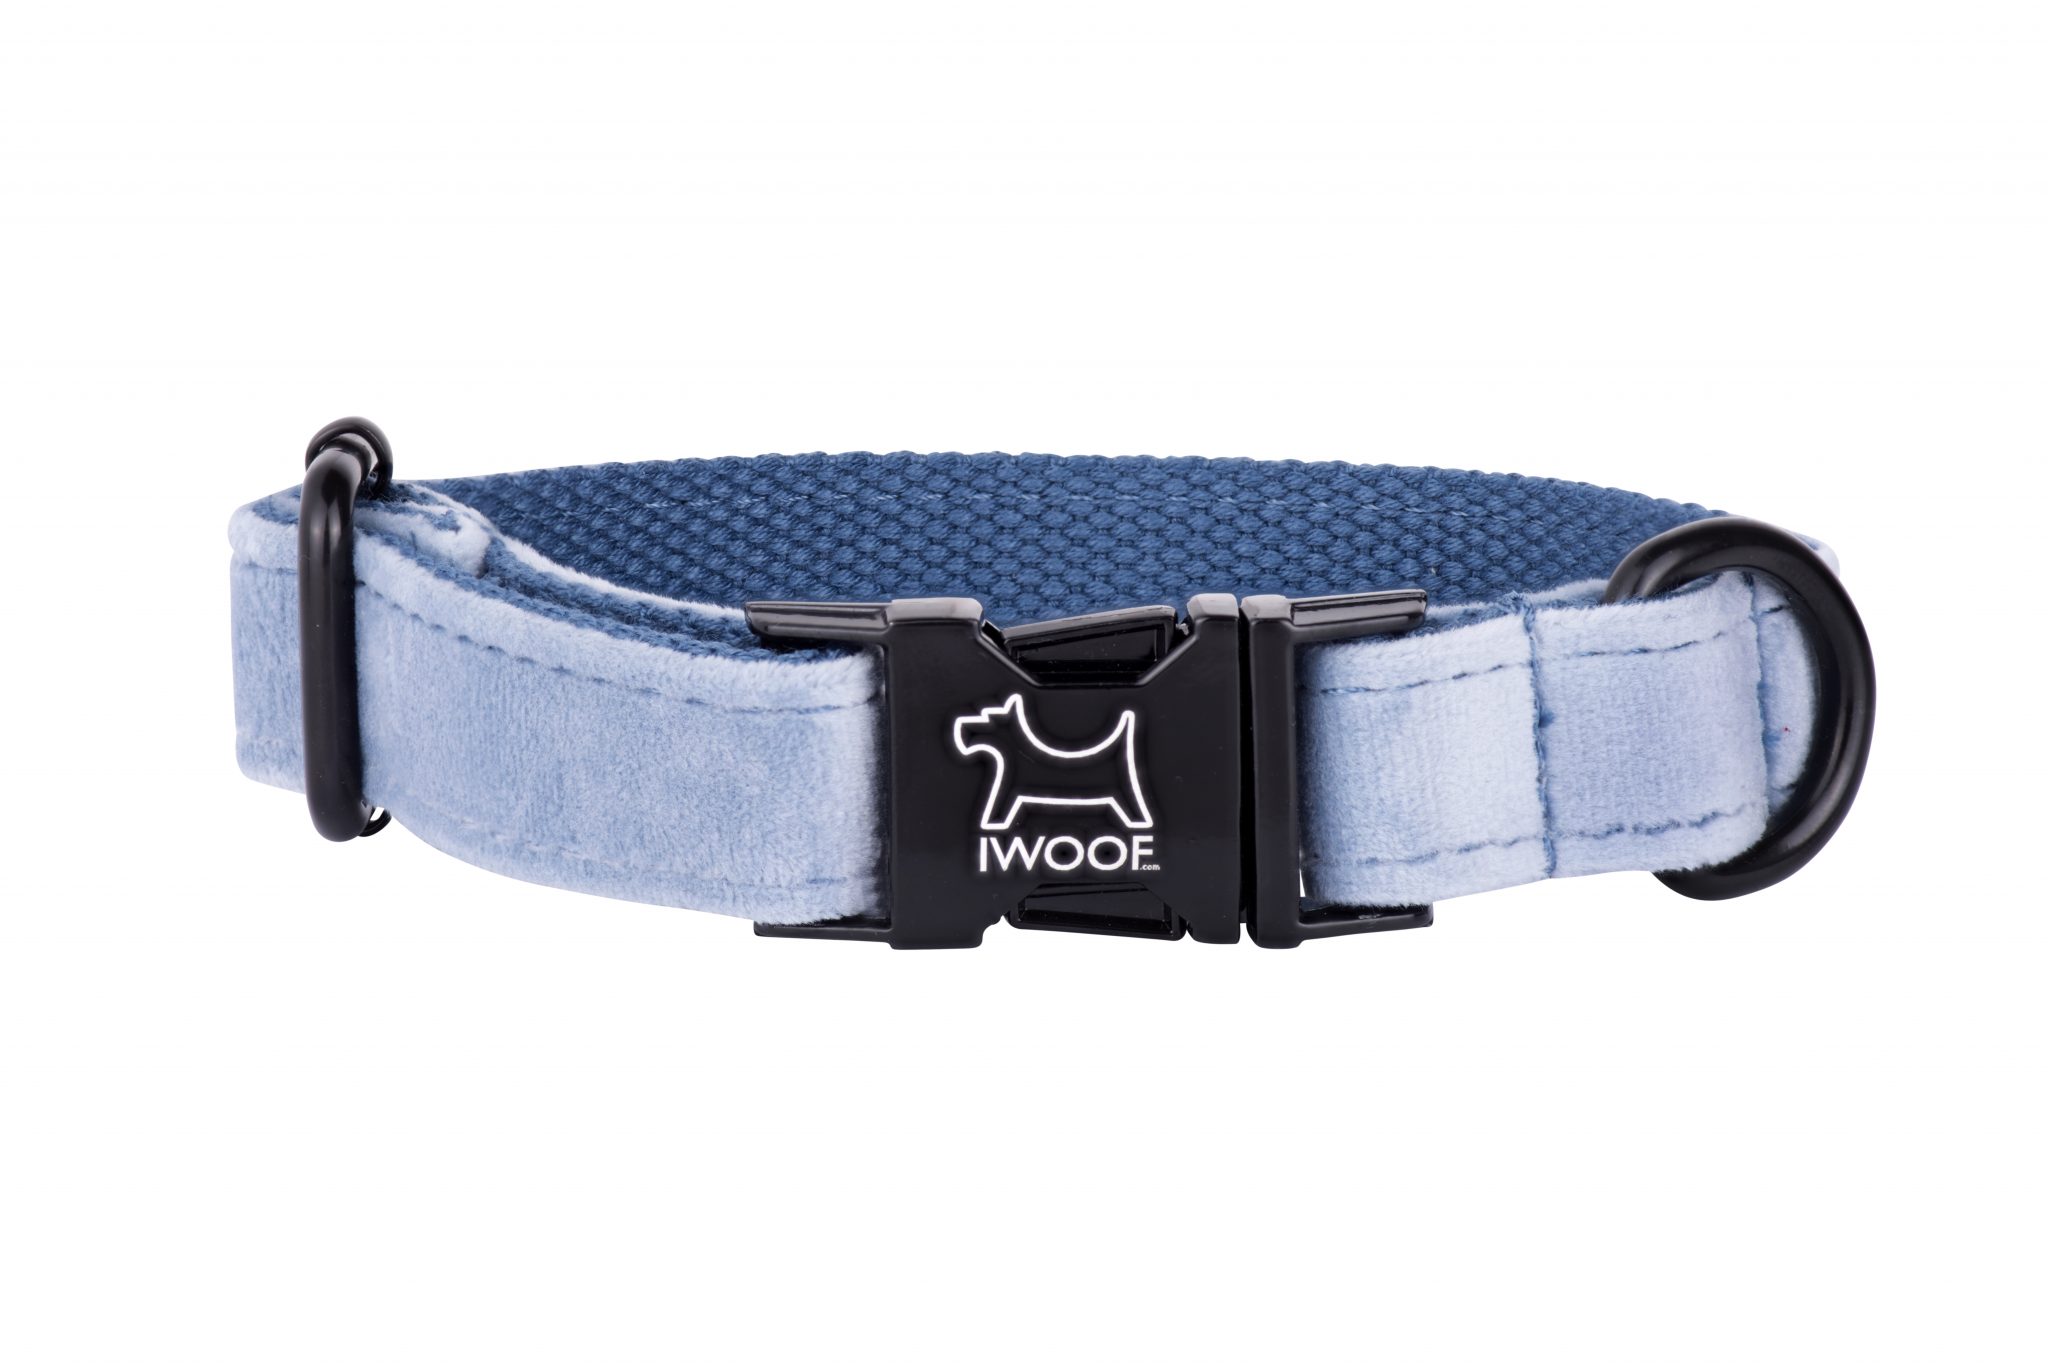 Sky designer dog collar by IWOOF with black buckle